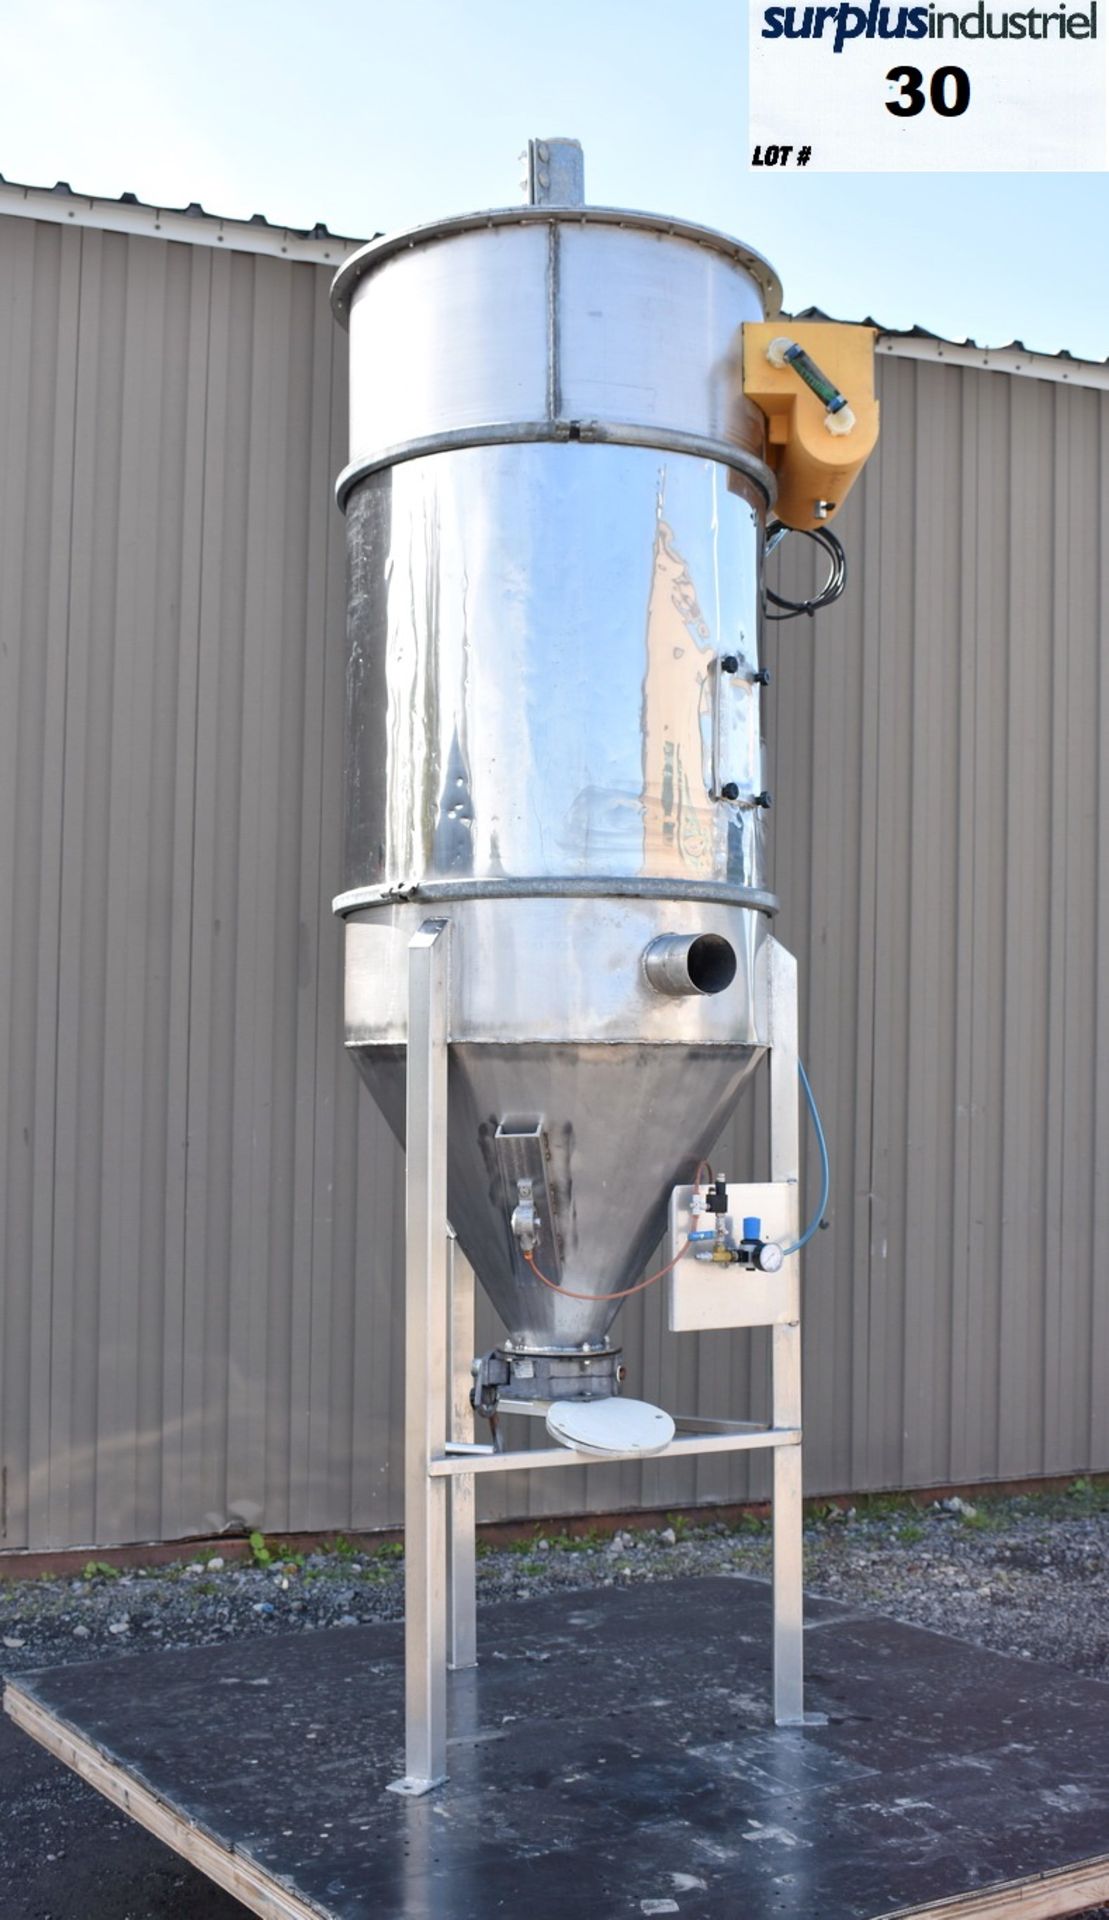 WAM FC3A 200 STAINLESS STEEL DUST COLLECTOR Item Location : Laval  -MANUFACTURER:  WAM